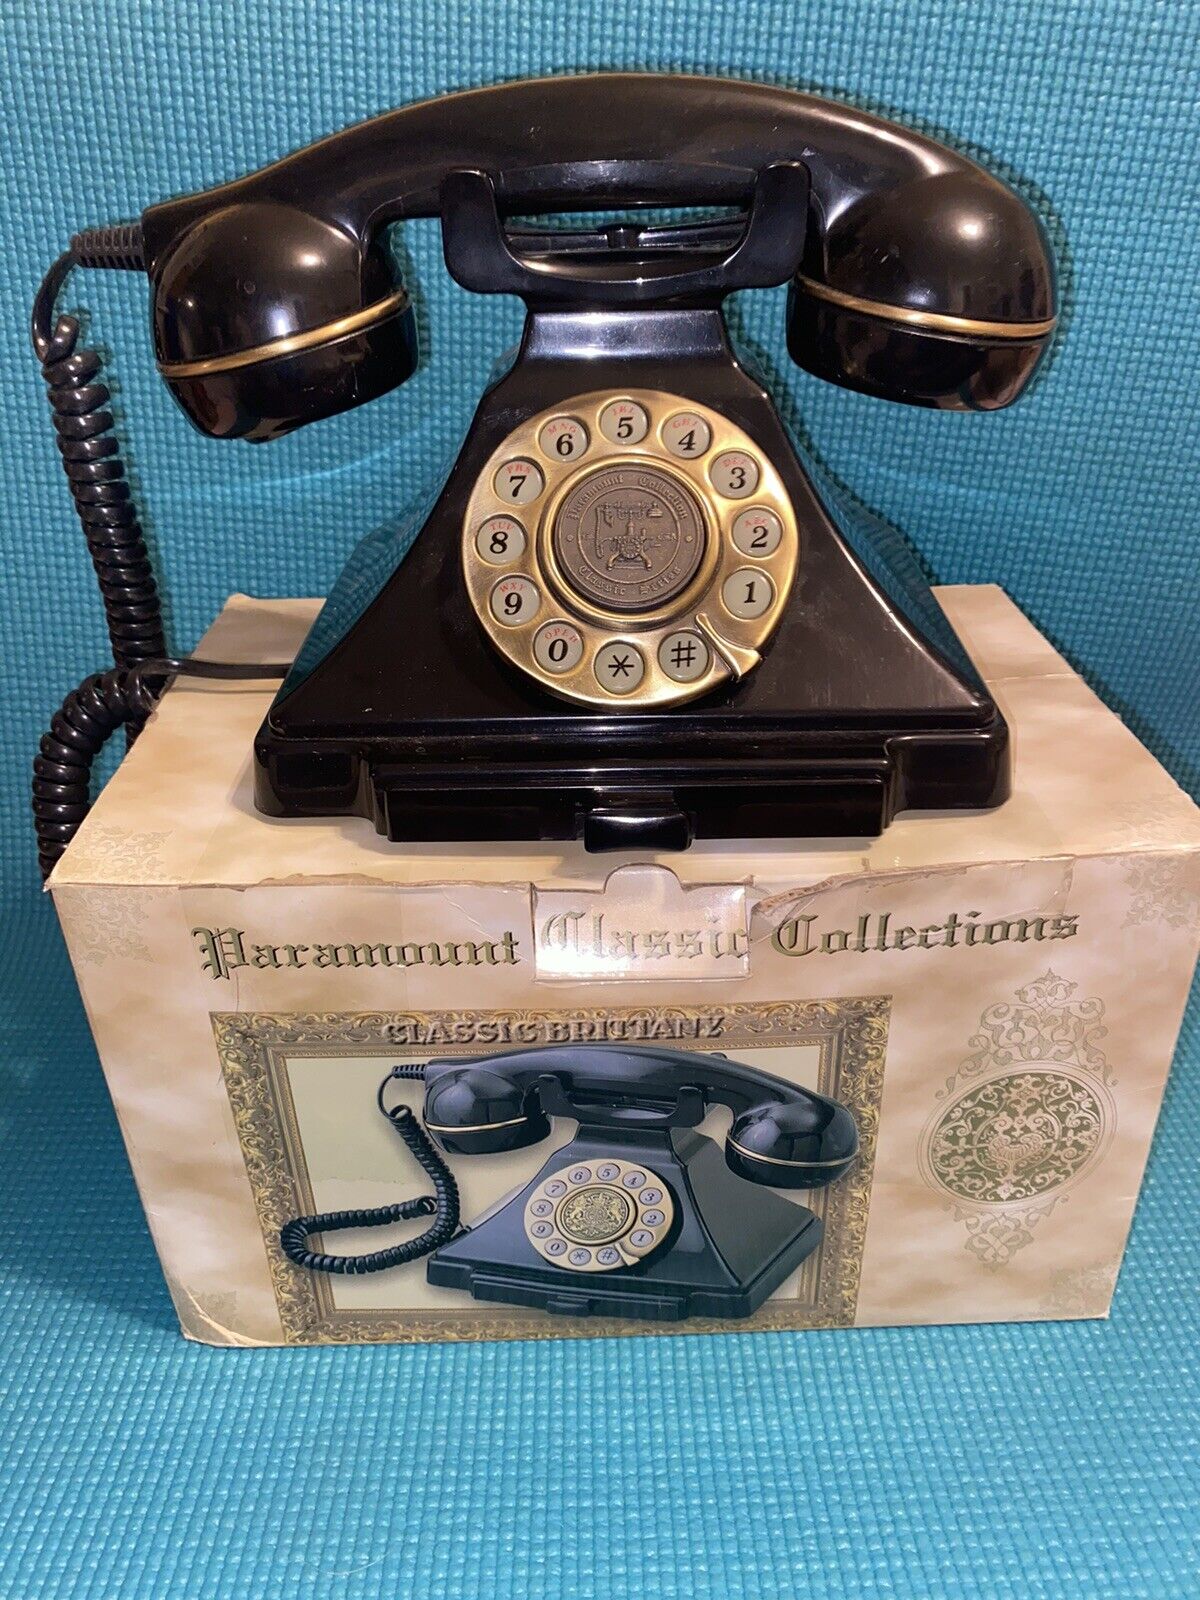 Paramount Collection Classic Series Retro Throwback VTG Telephone Push Button